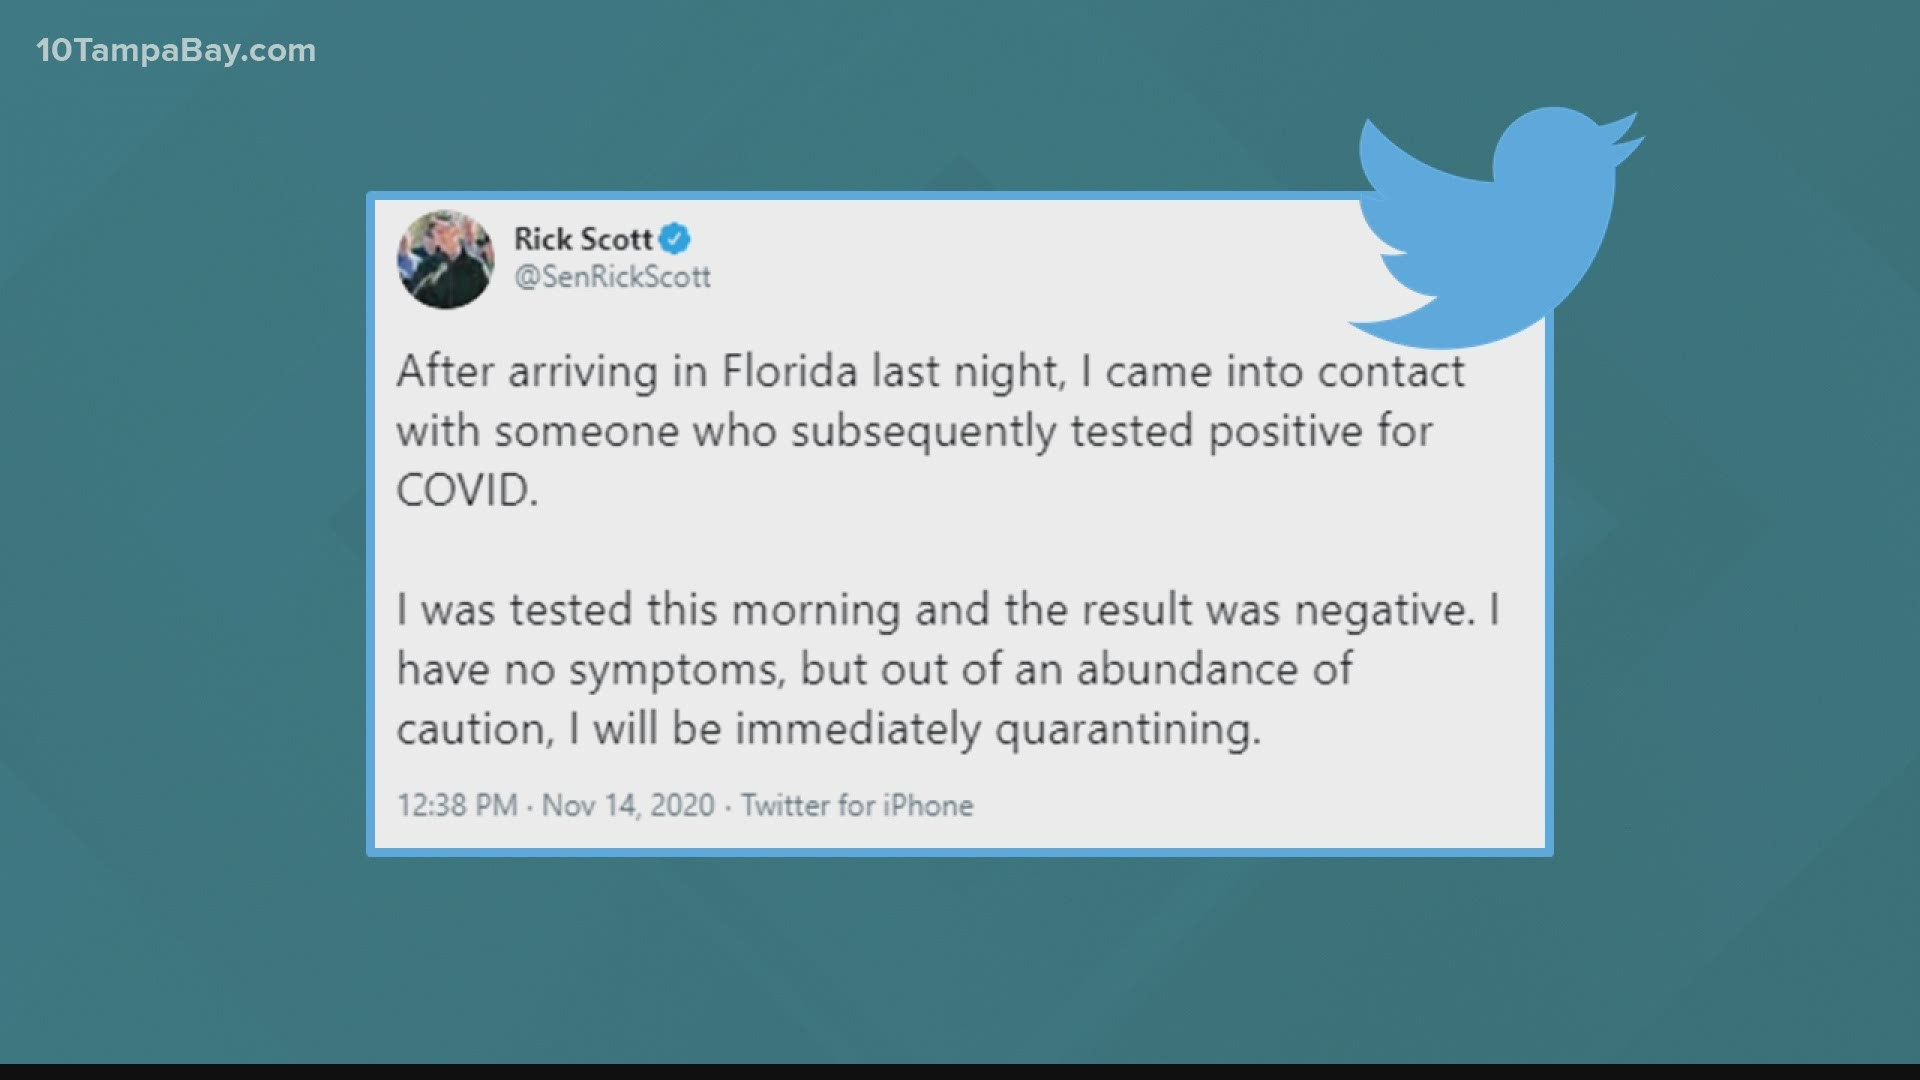 Scott says he has tested negative since the encounter and has no symptoms.